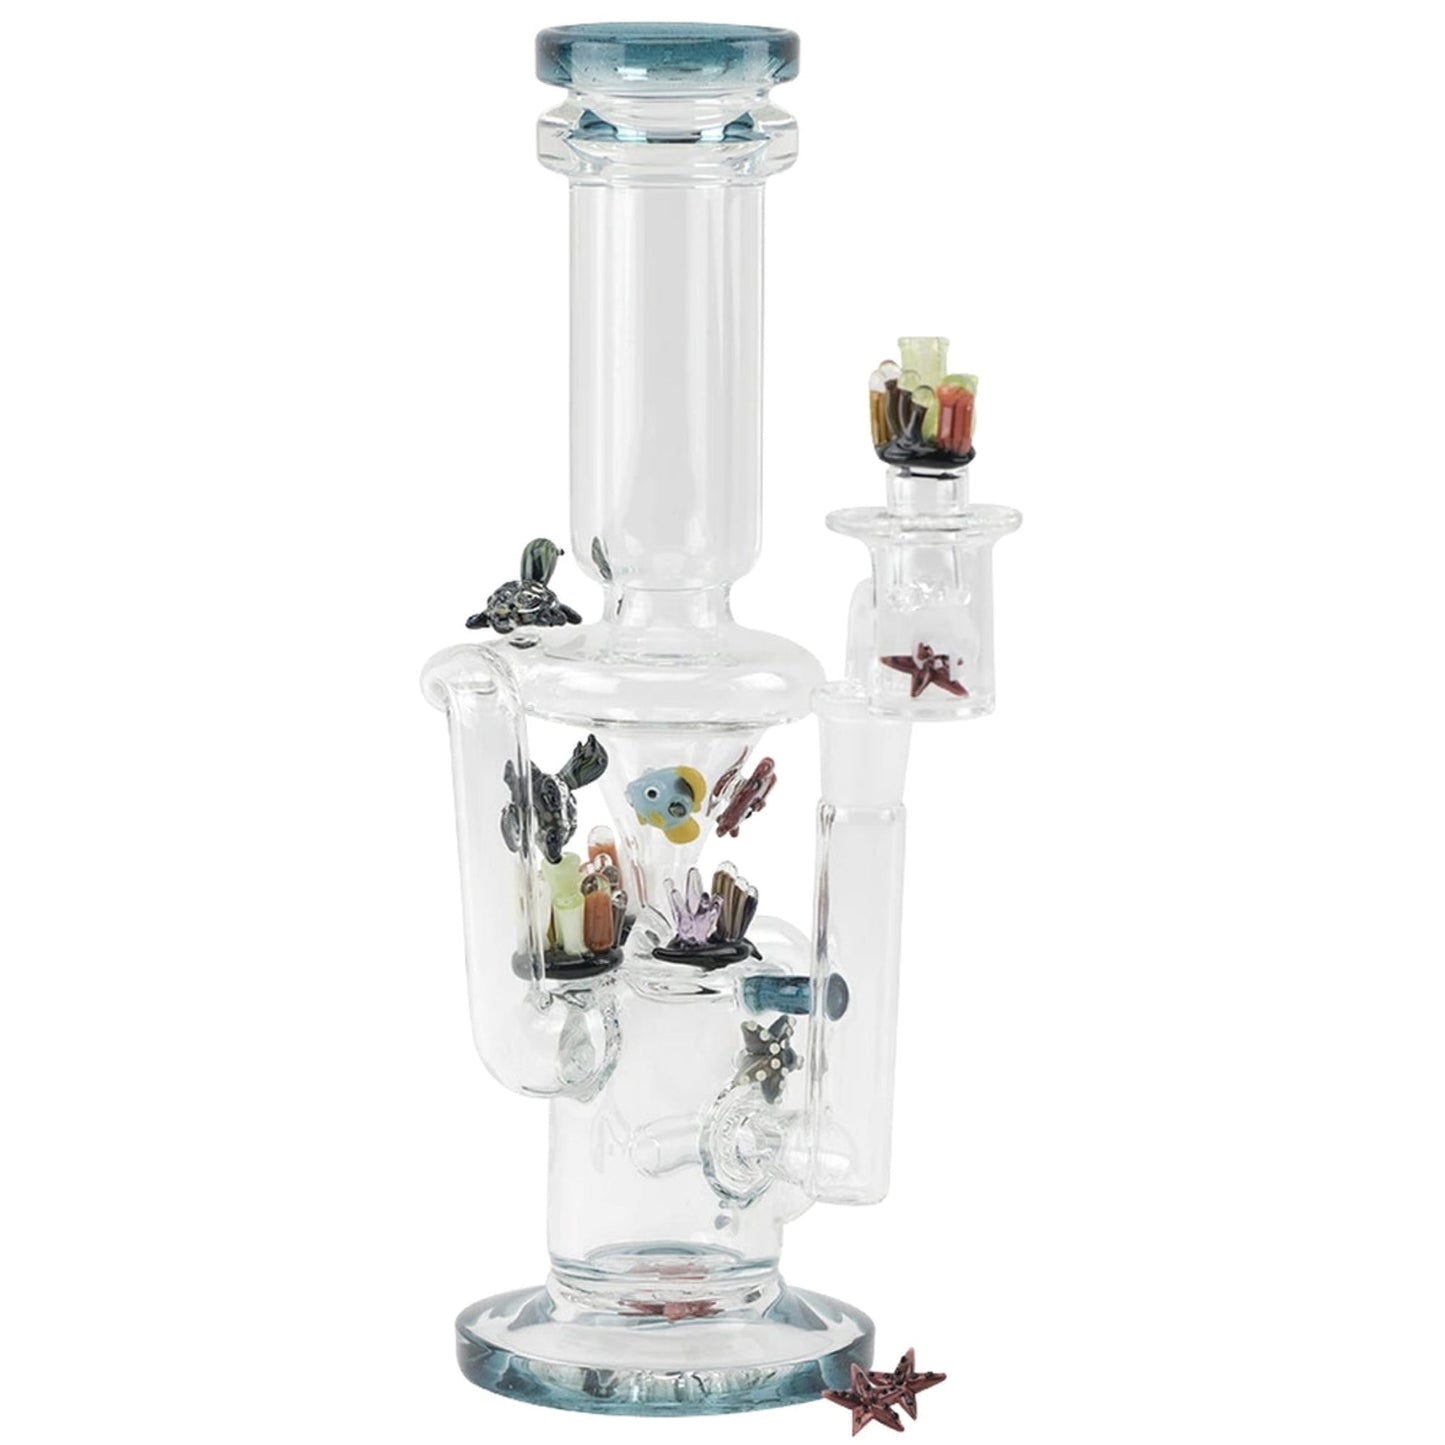 Empire Glassworks “Under the Sea” Recycler Rig 🐠 by Empire Glassworks | Mission Dispensary